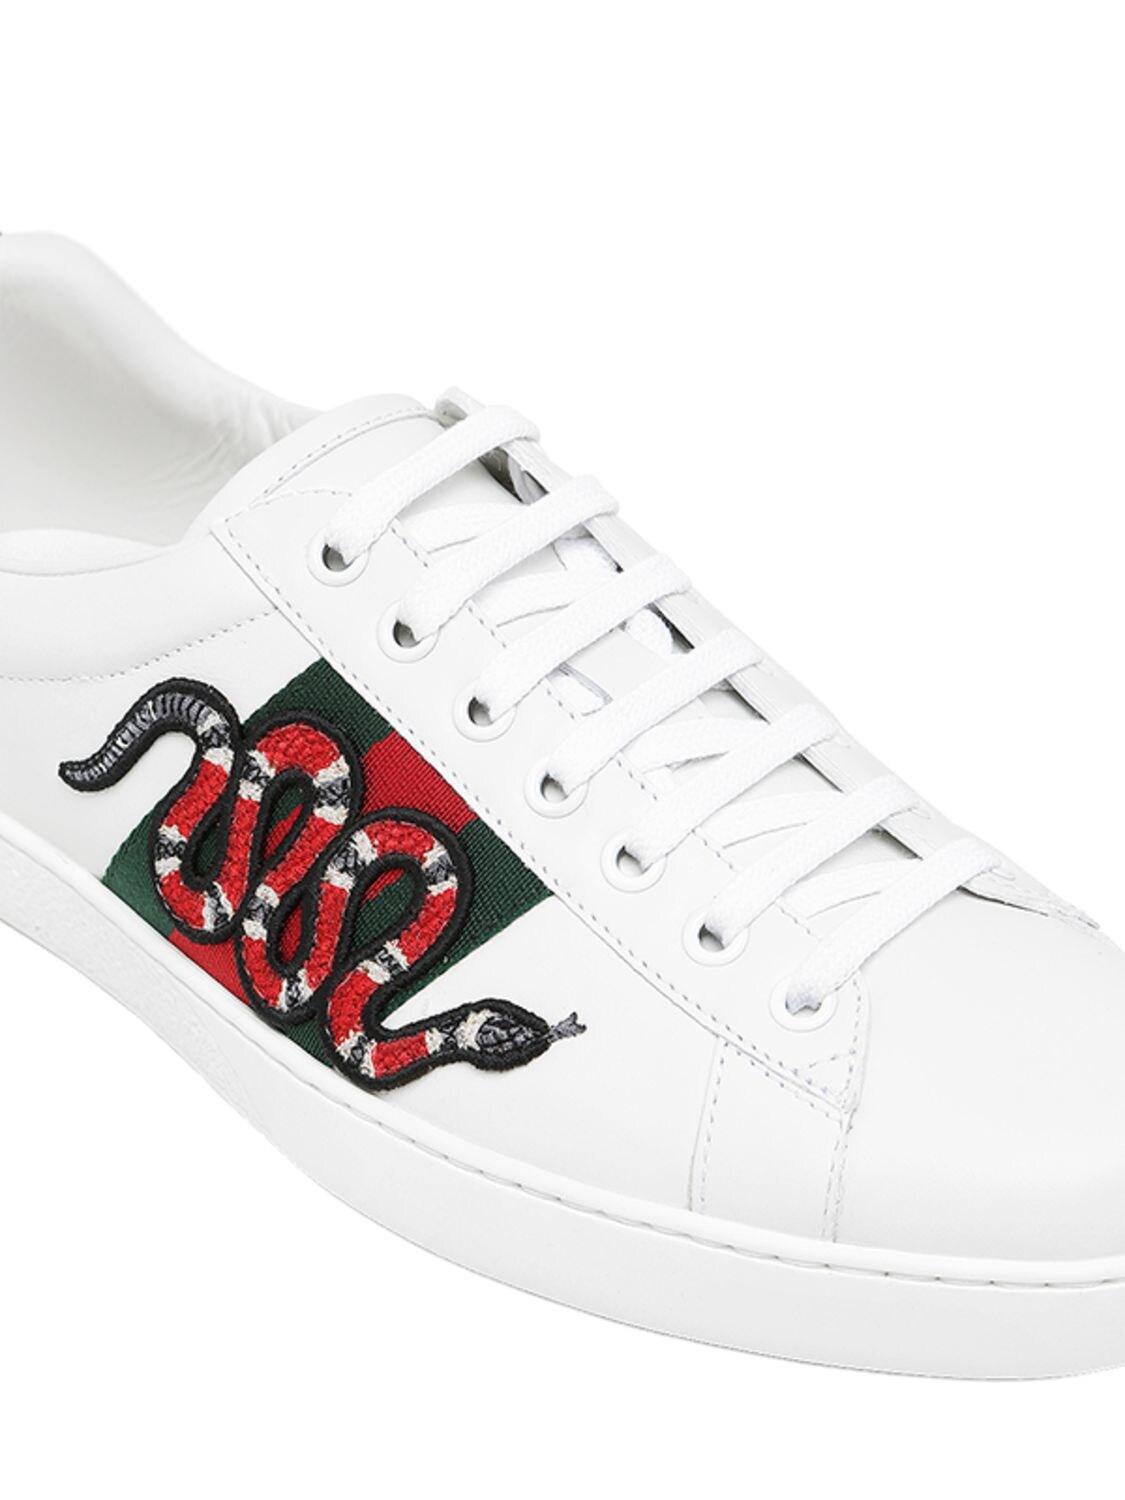 gucci shoes snake price